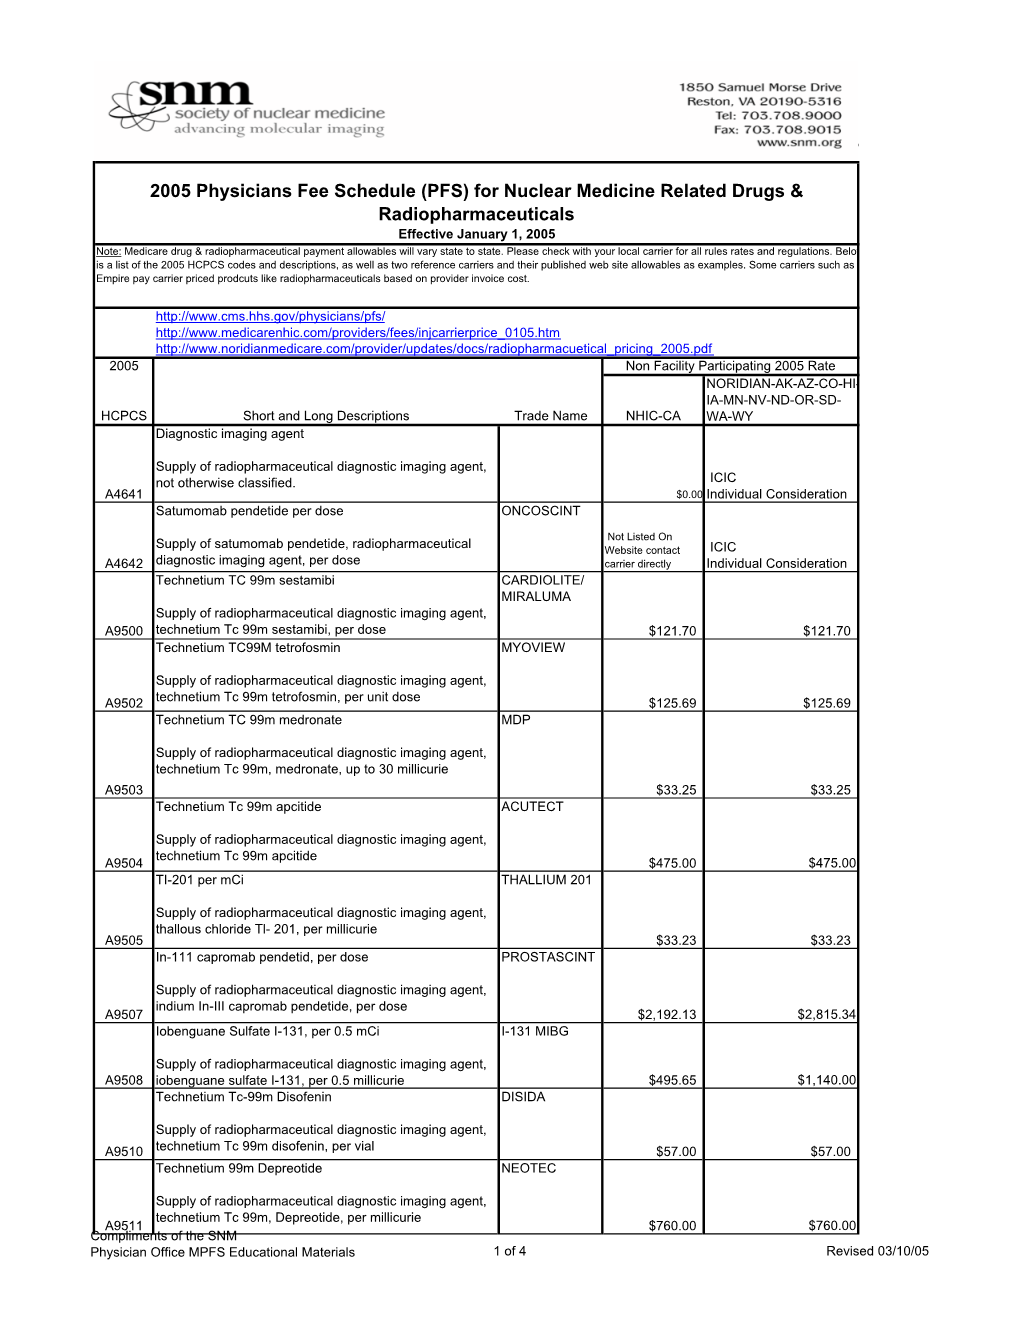 2005 Physicians Fee Schedule (PFS) for Nuclear Medicine Related Drugs